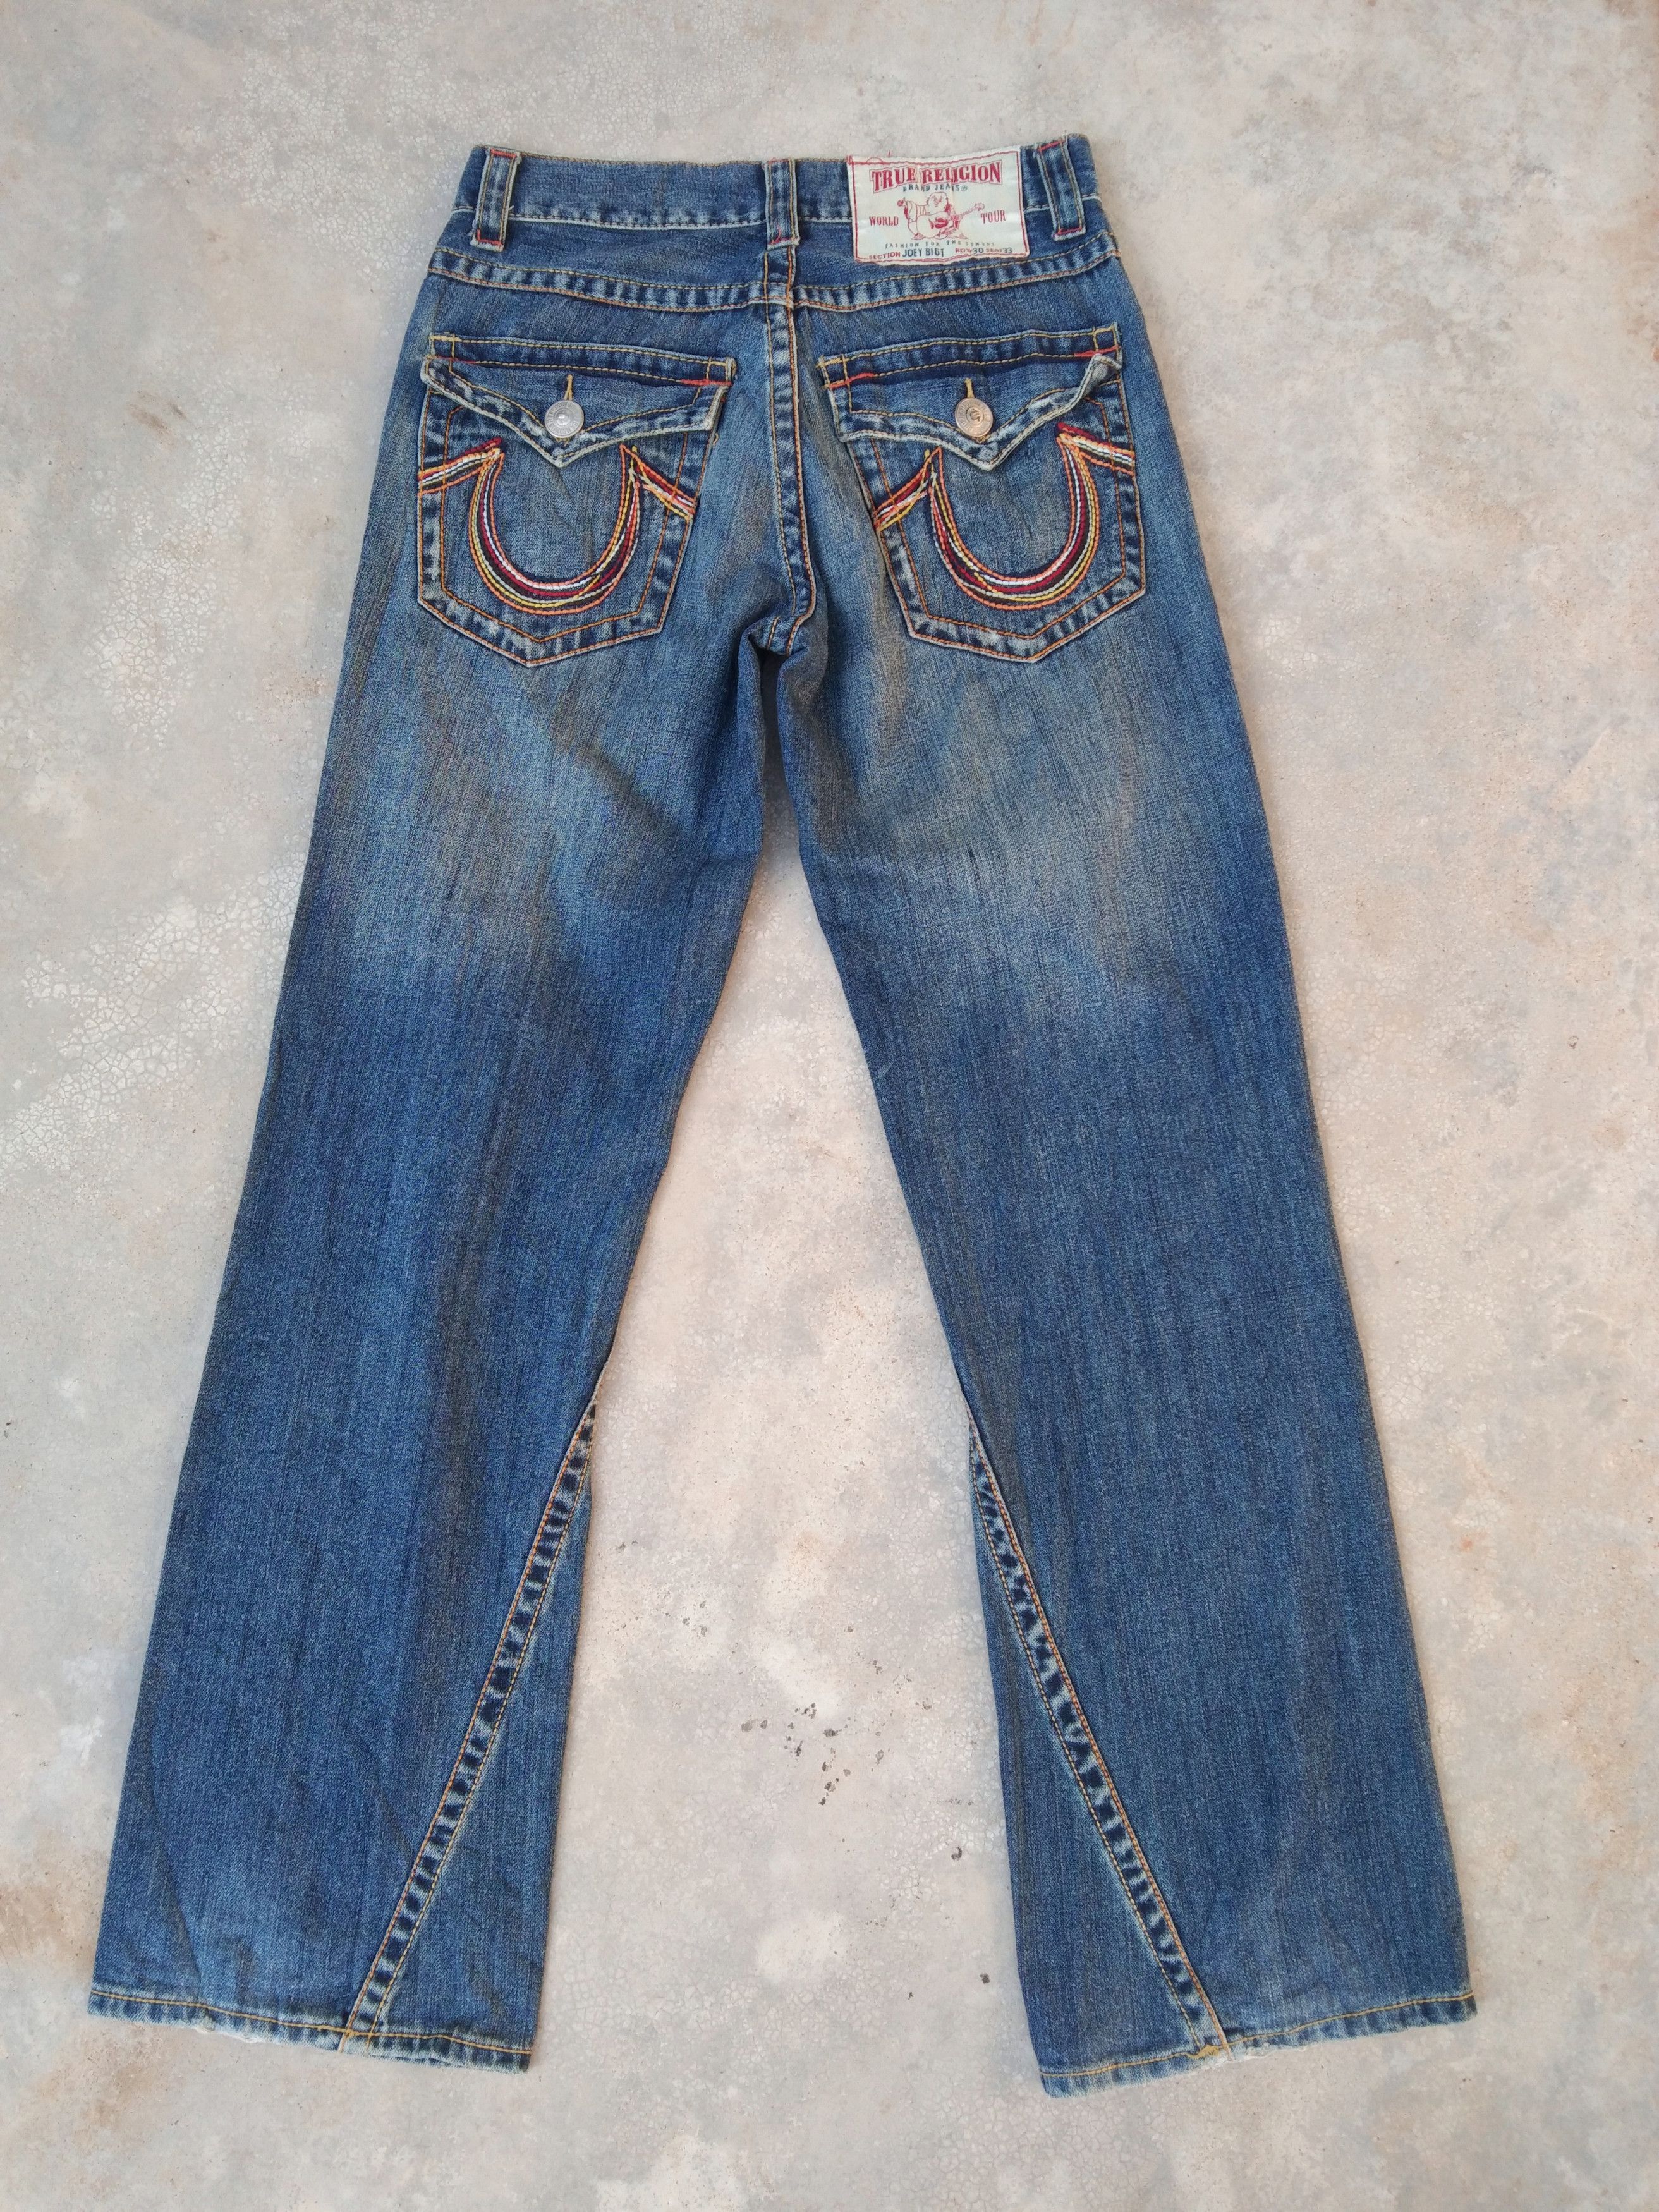 Pre-owned Jean X True Religion Vintage True Religion Jeans Men Made In Usa 30x32 In Blue